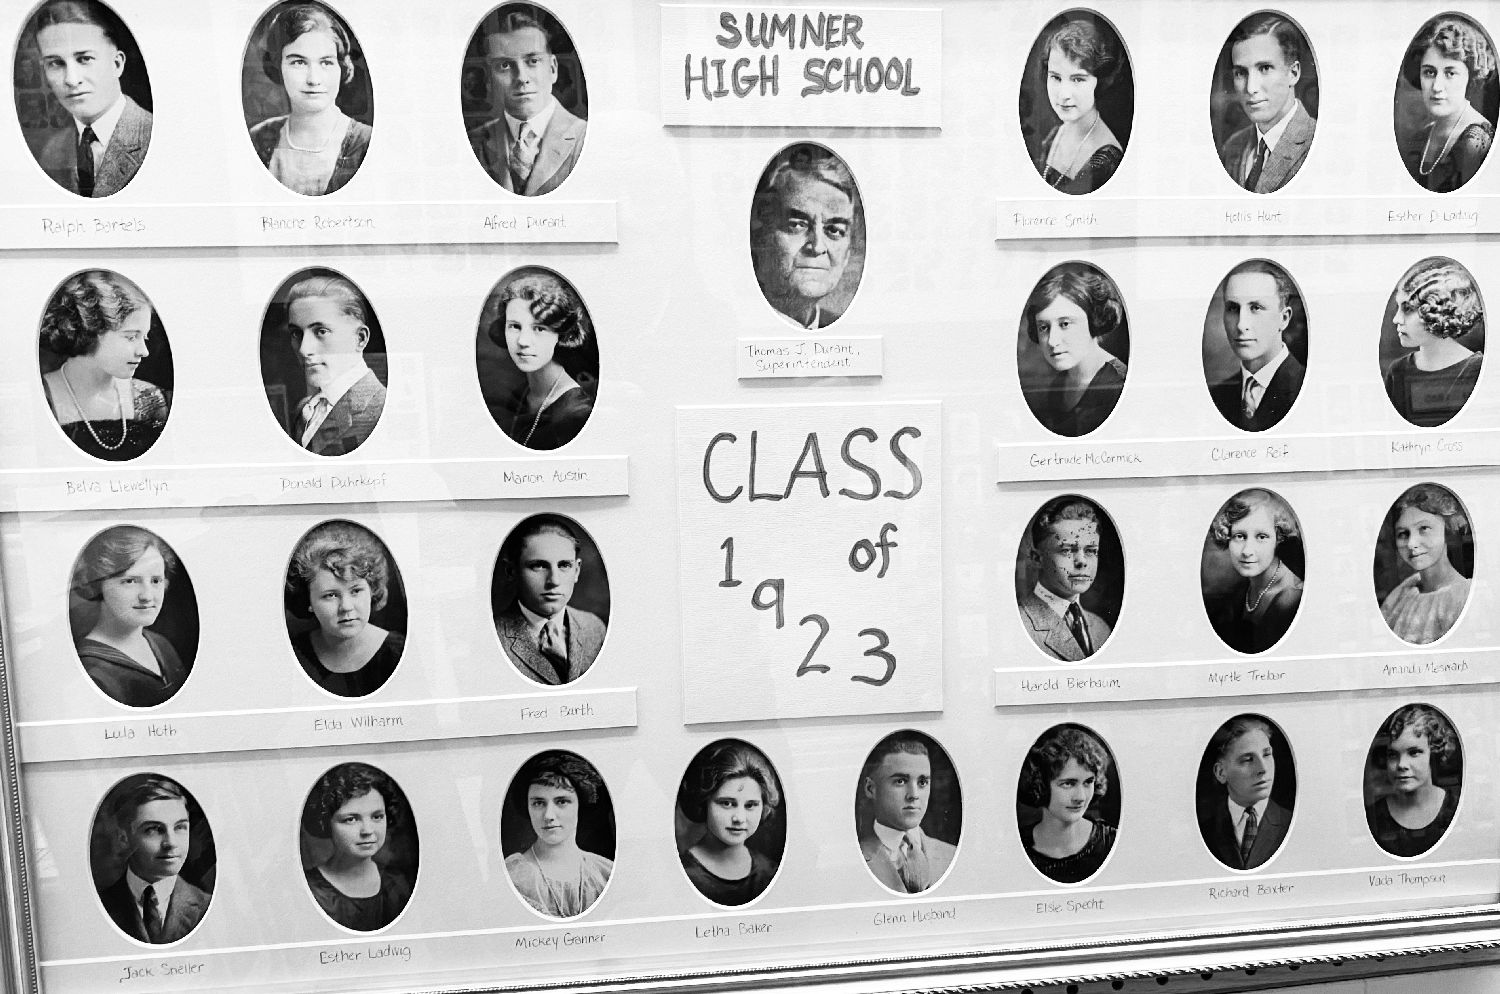 Sumner Memories Are Forever - Class of 1923